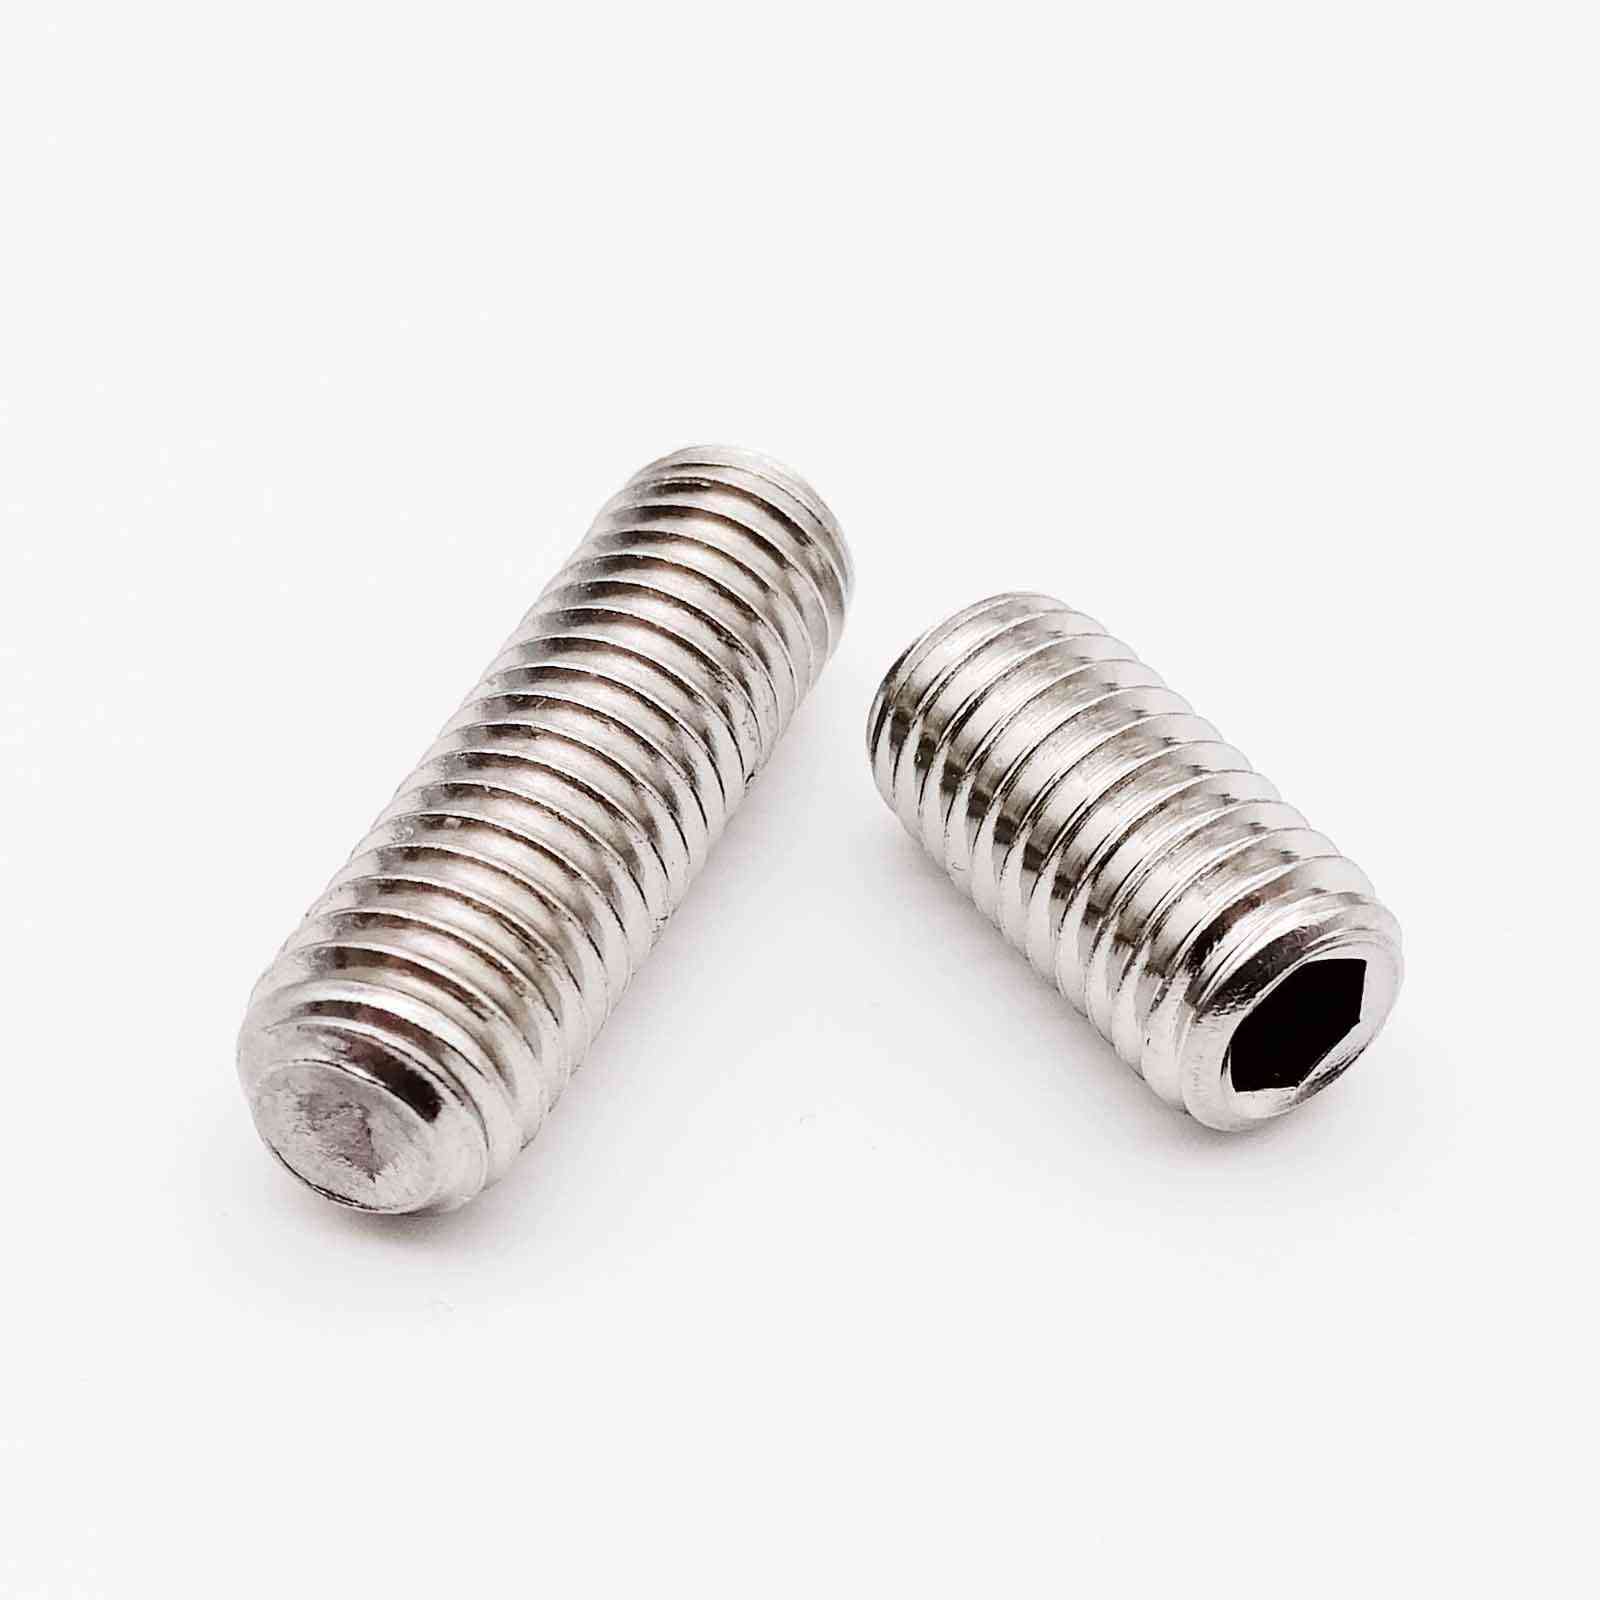 12.9 Grade Alloy And 304 Stainless Steel-hexagon Socket Head Cup, Screw Bolt Set